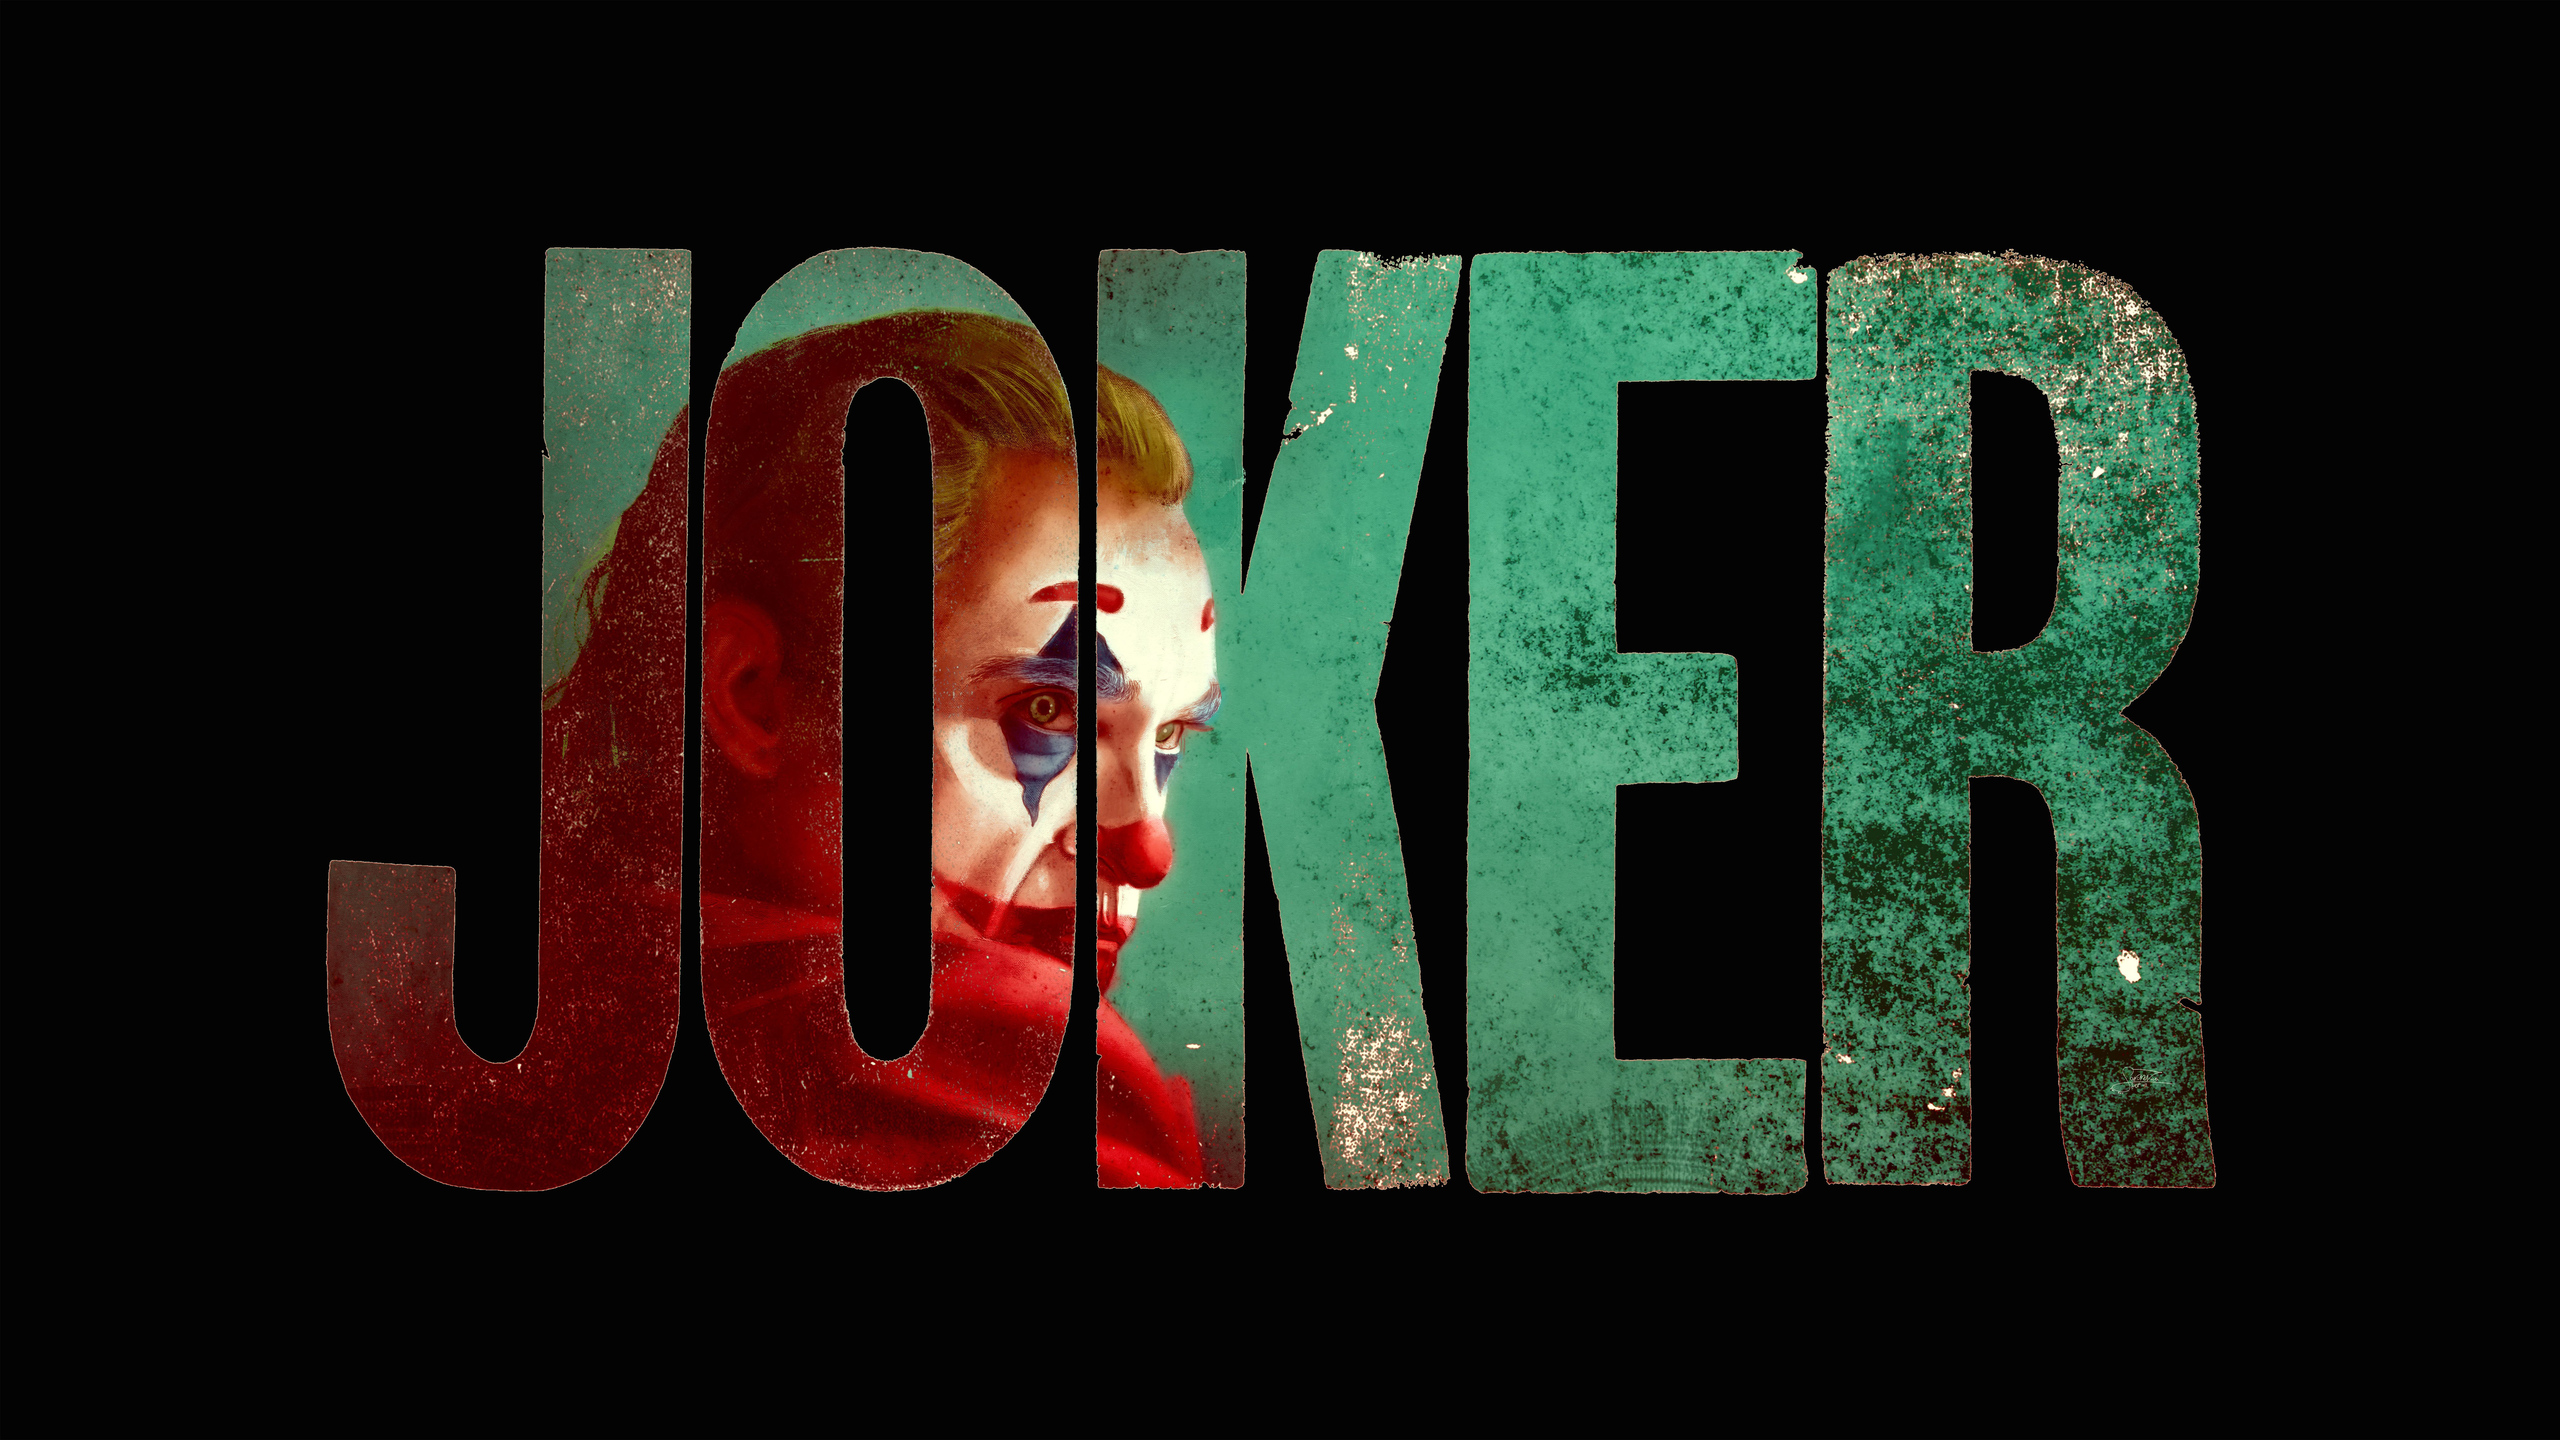 Joker 8k Logo 1440P Resolution HD 4k Wallpaper, Image, Background, Photo and Picture